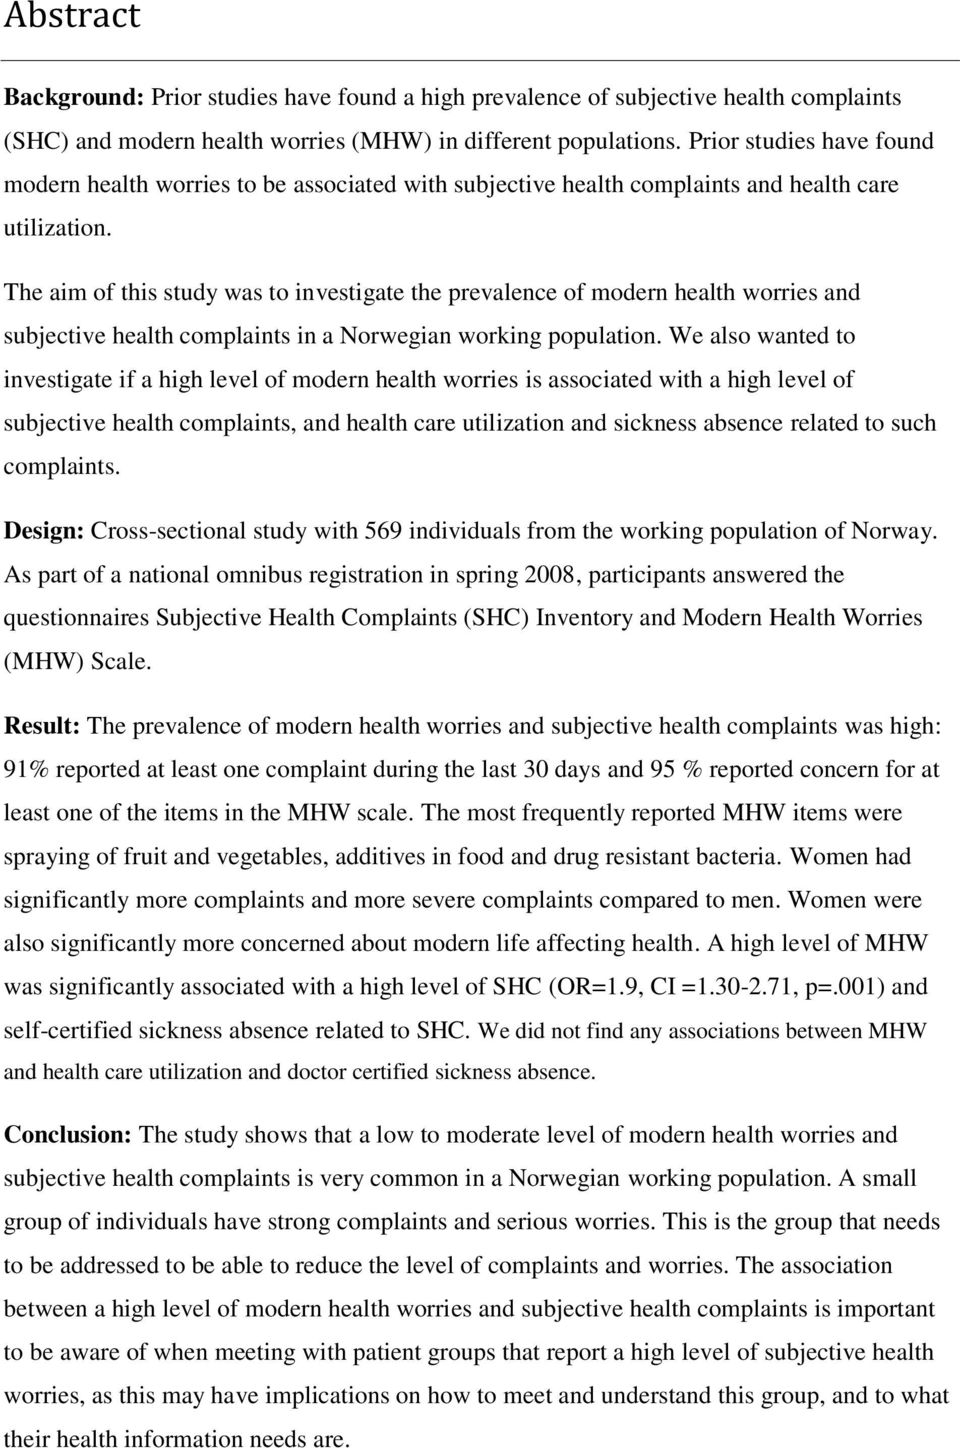 The aim of this study was to investigate the prevalence of modern health worries and subjective health complaints in a Norwegian working population.